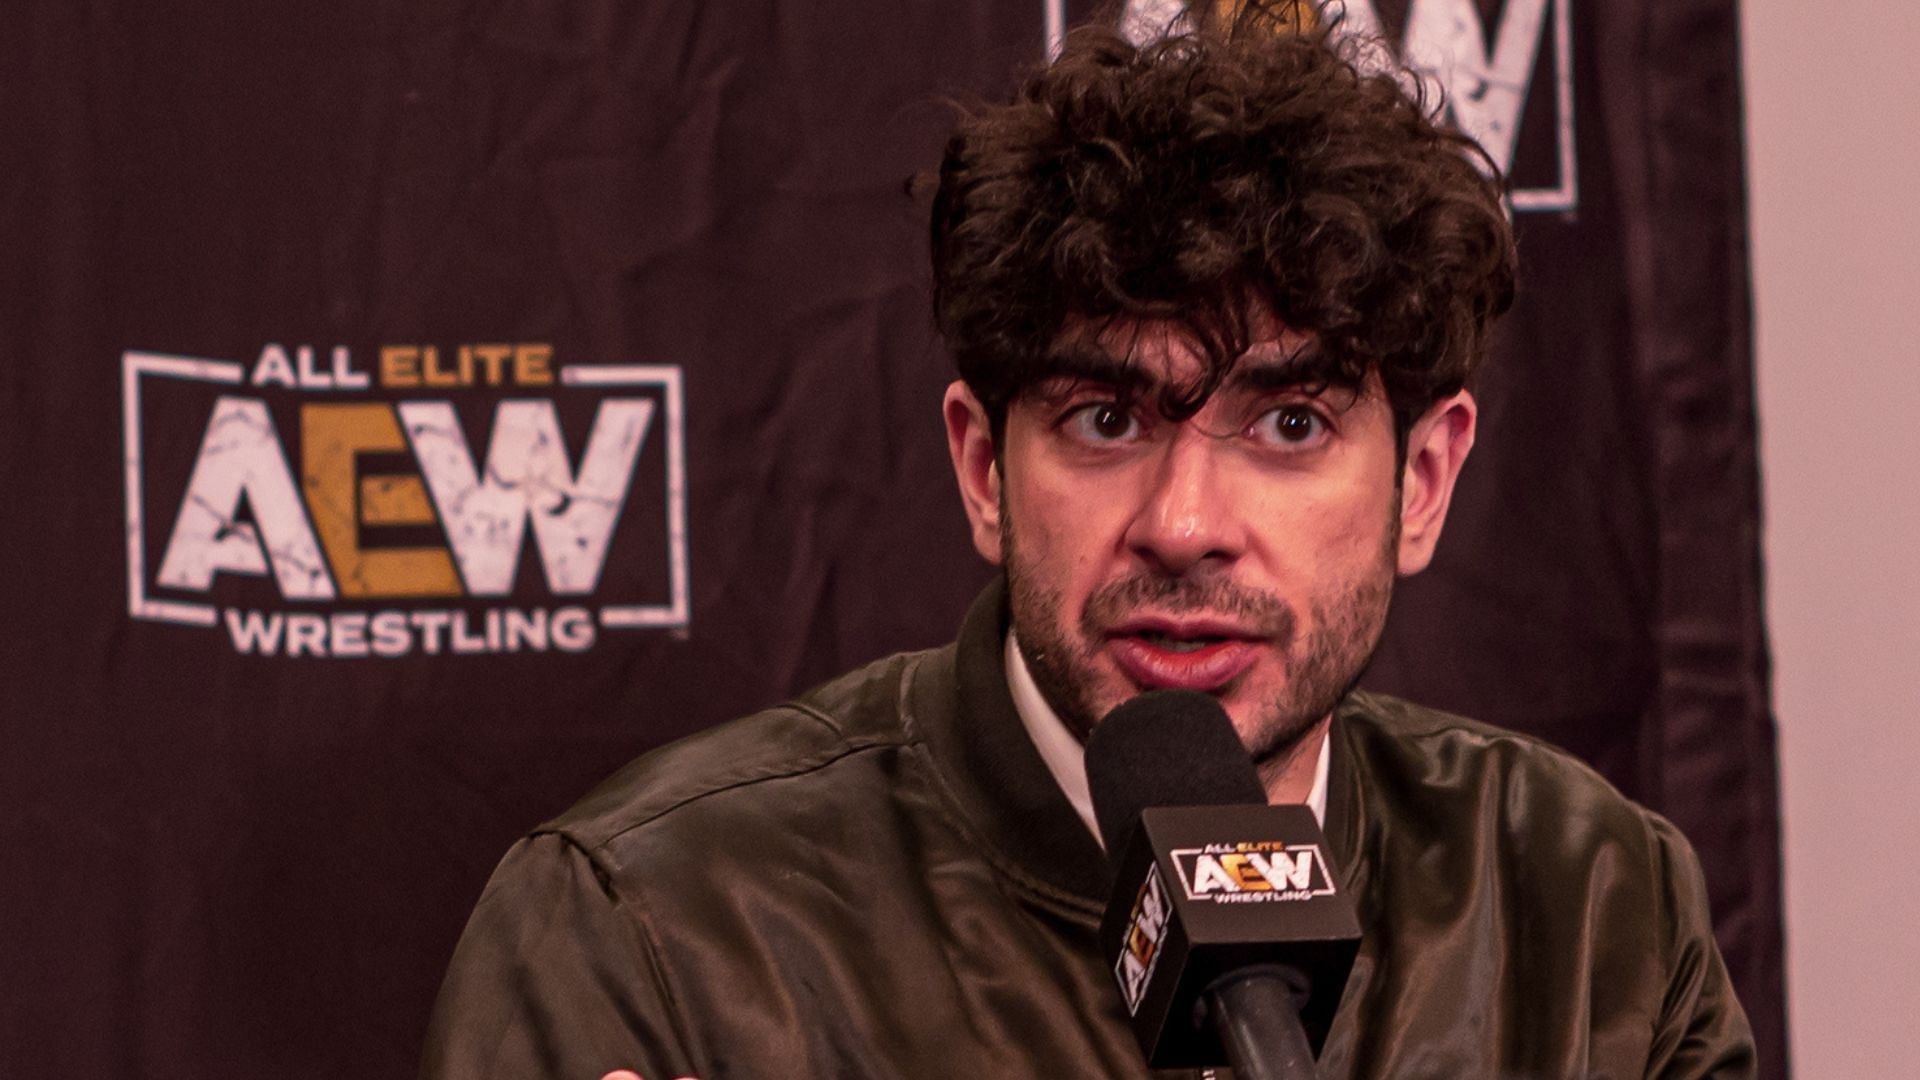 Which former World Champion could be on his way to AEW in the future?